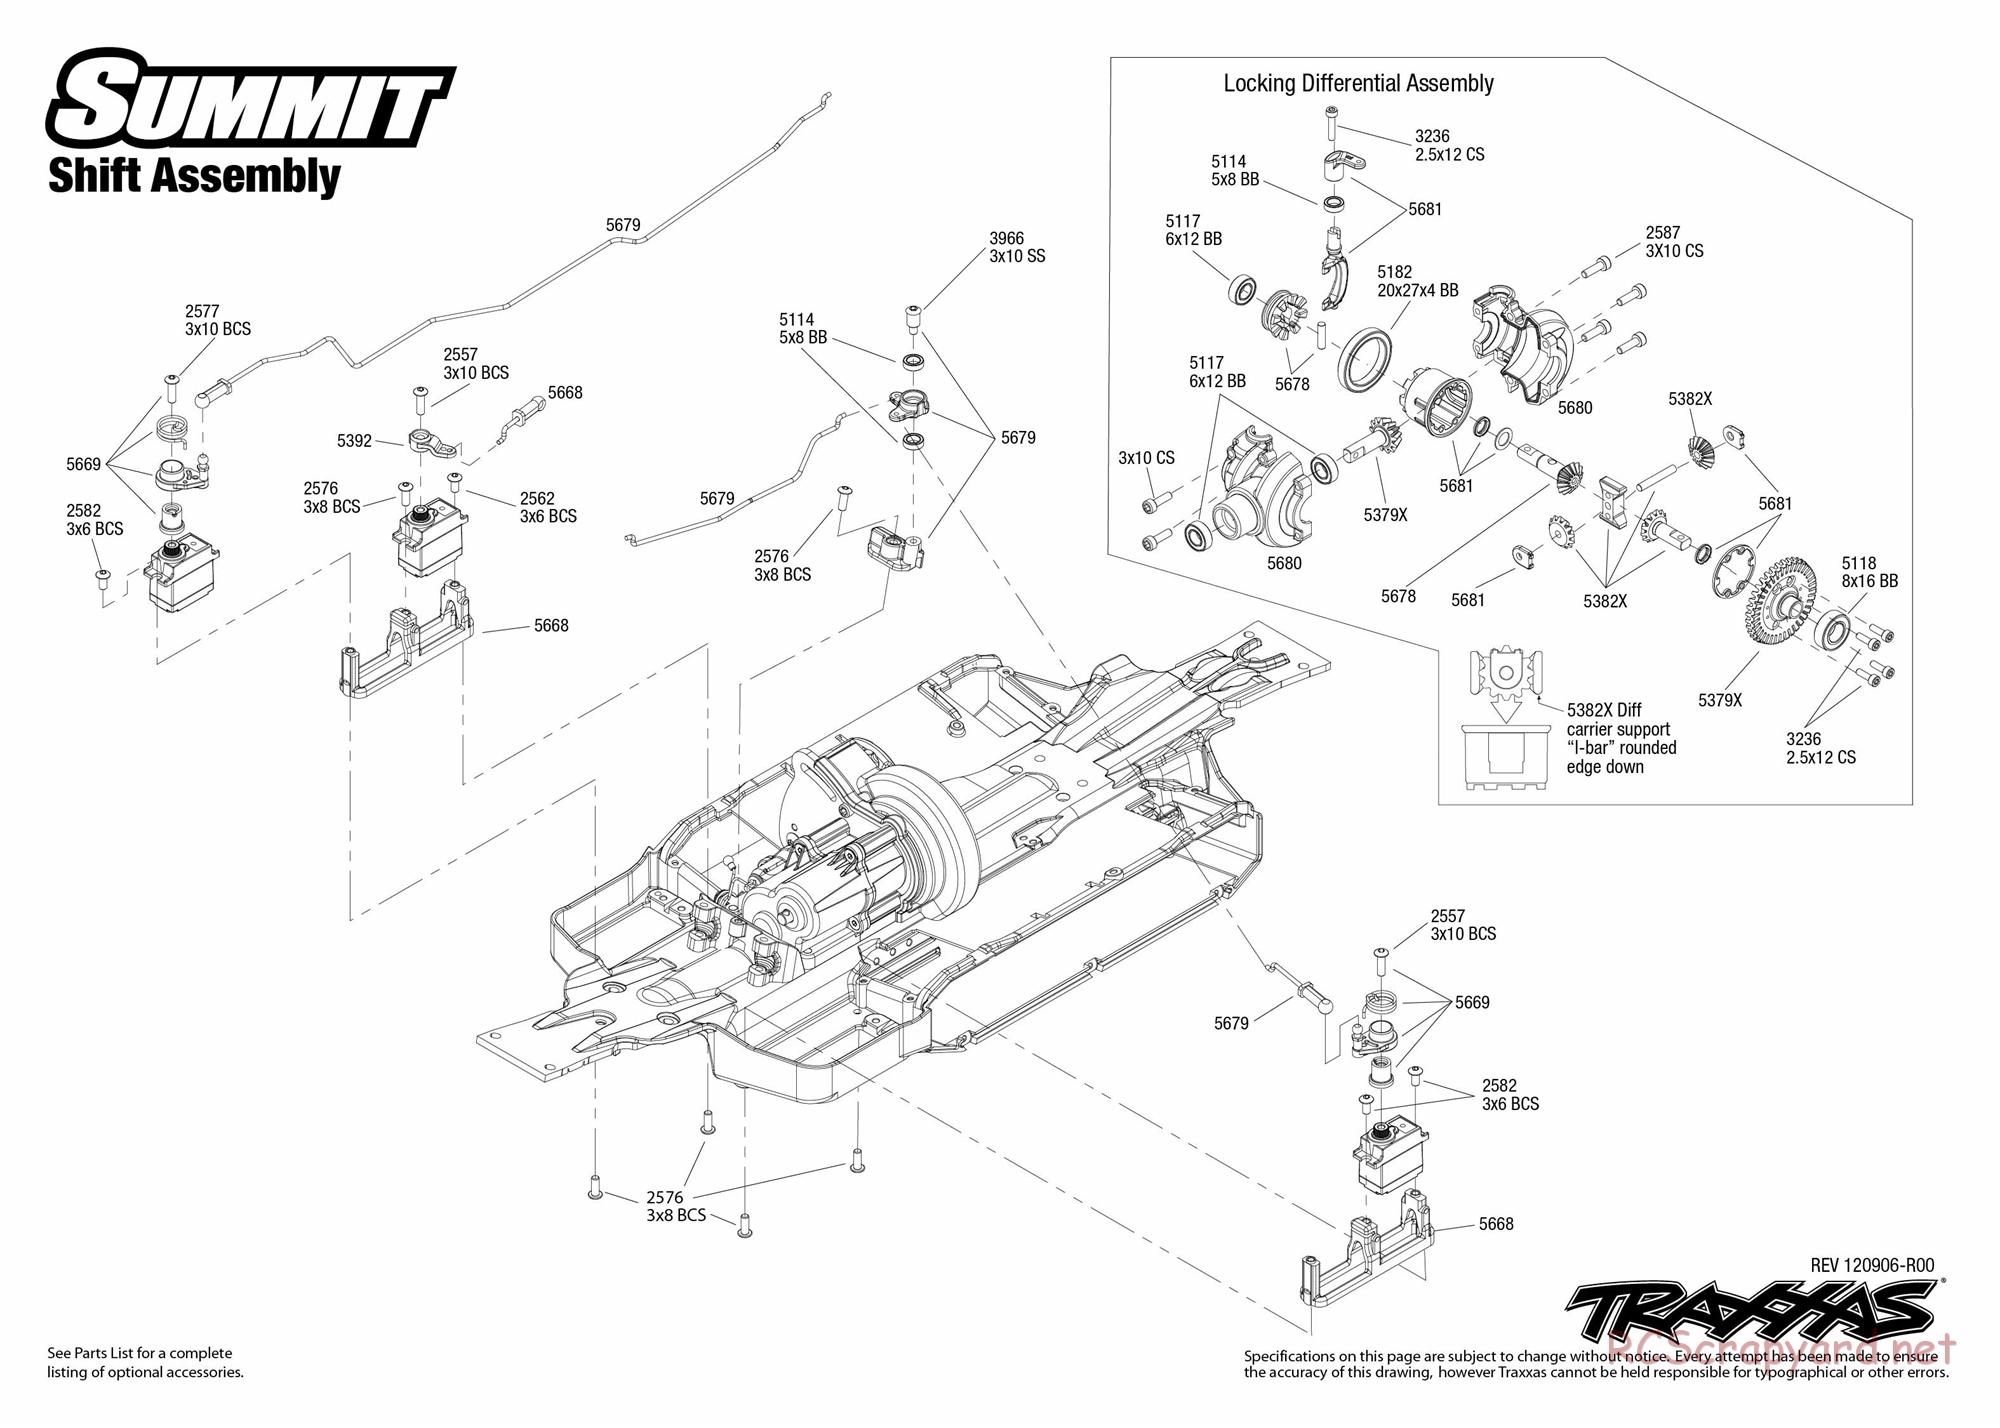 Traxxas - Summit LiPo (2012) - Exploded Views - Page 5